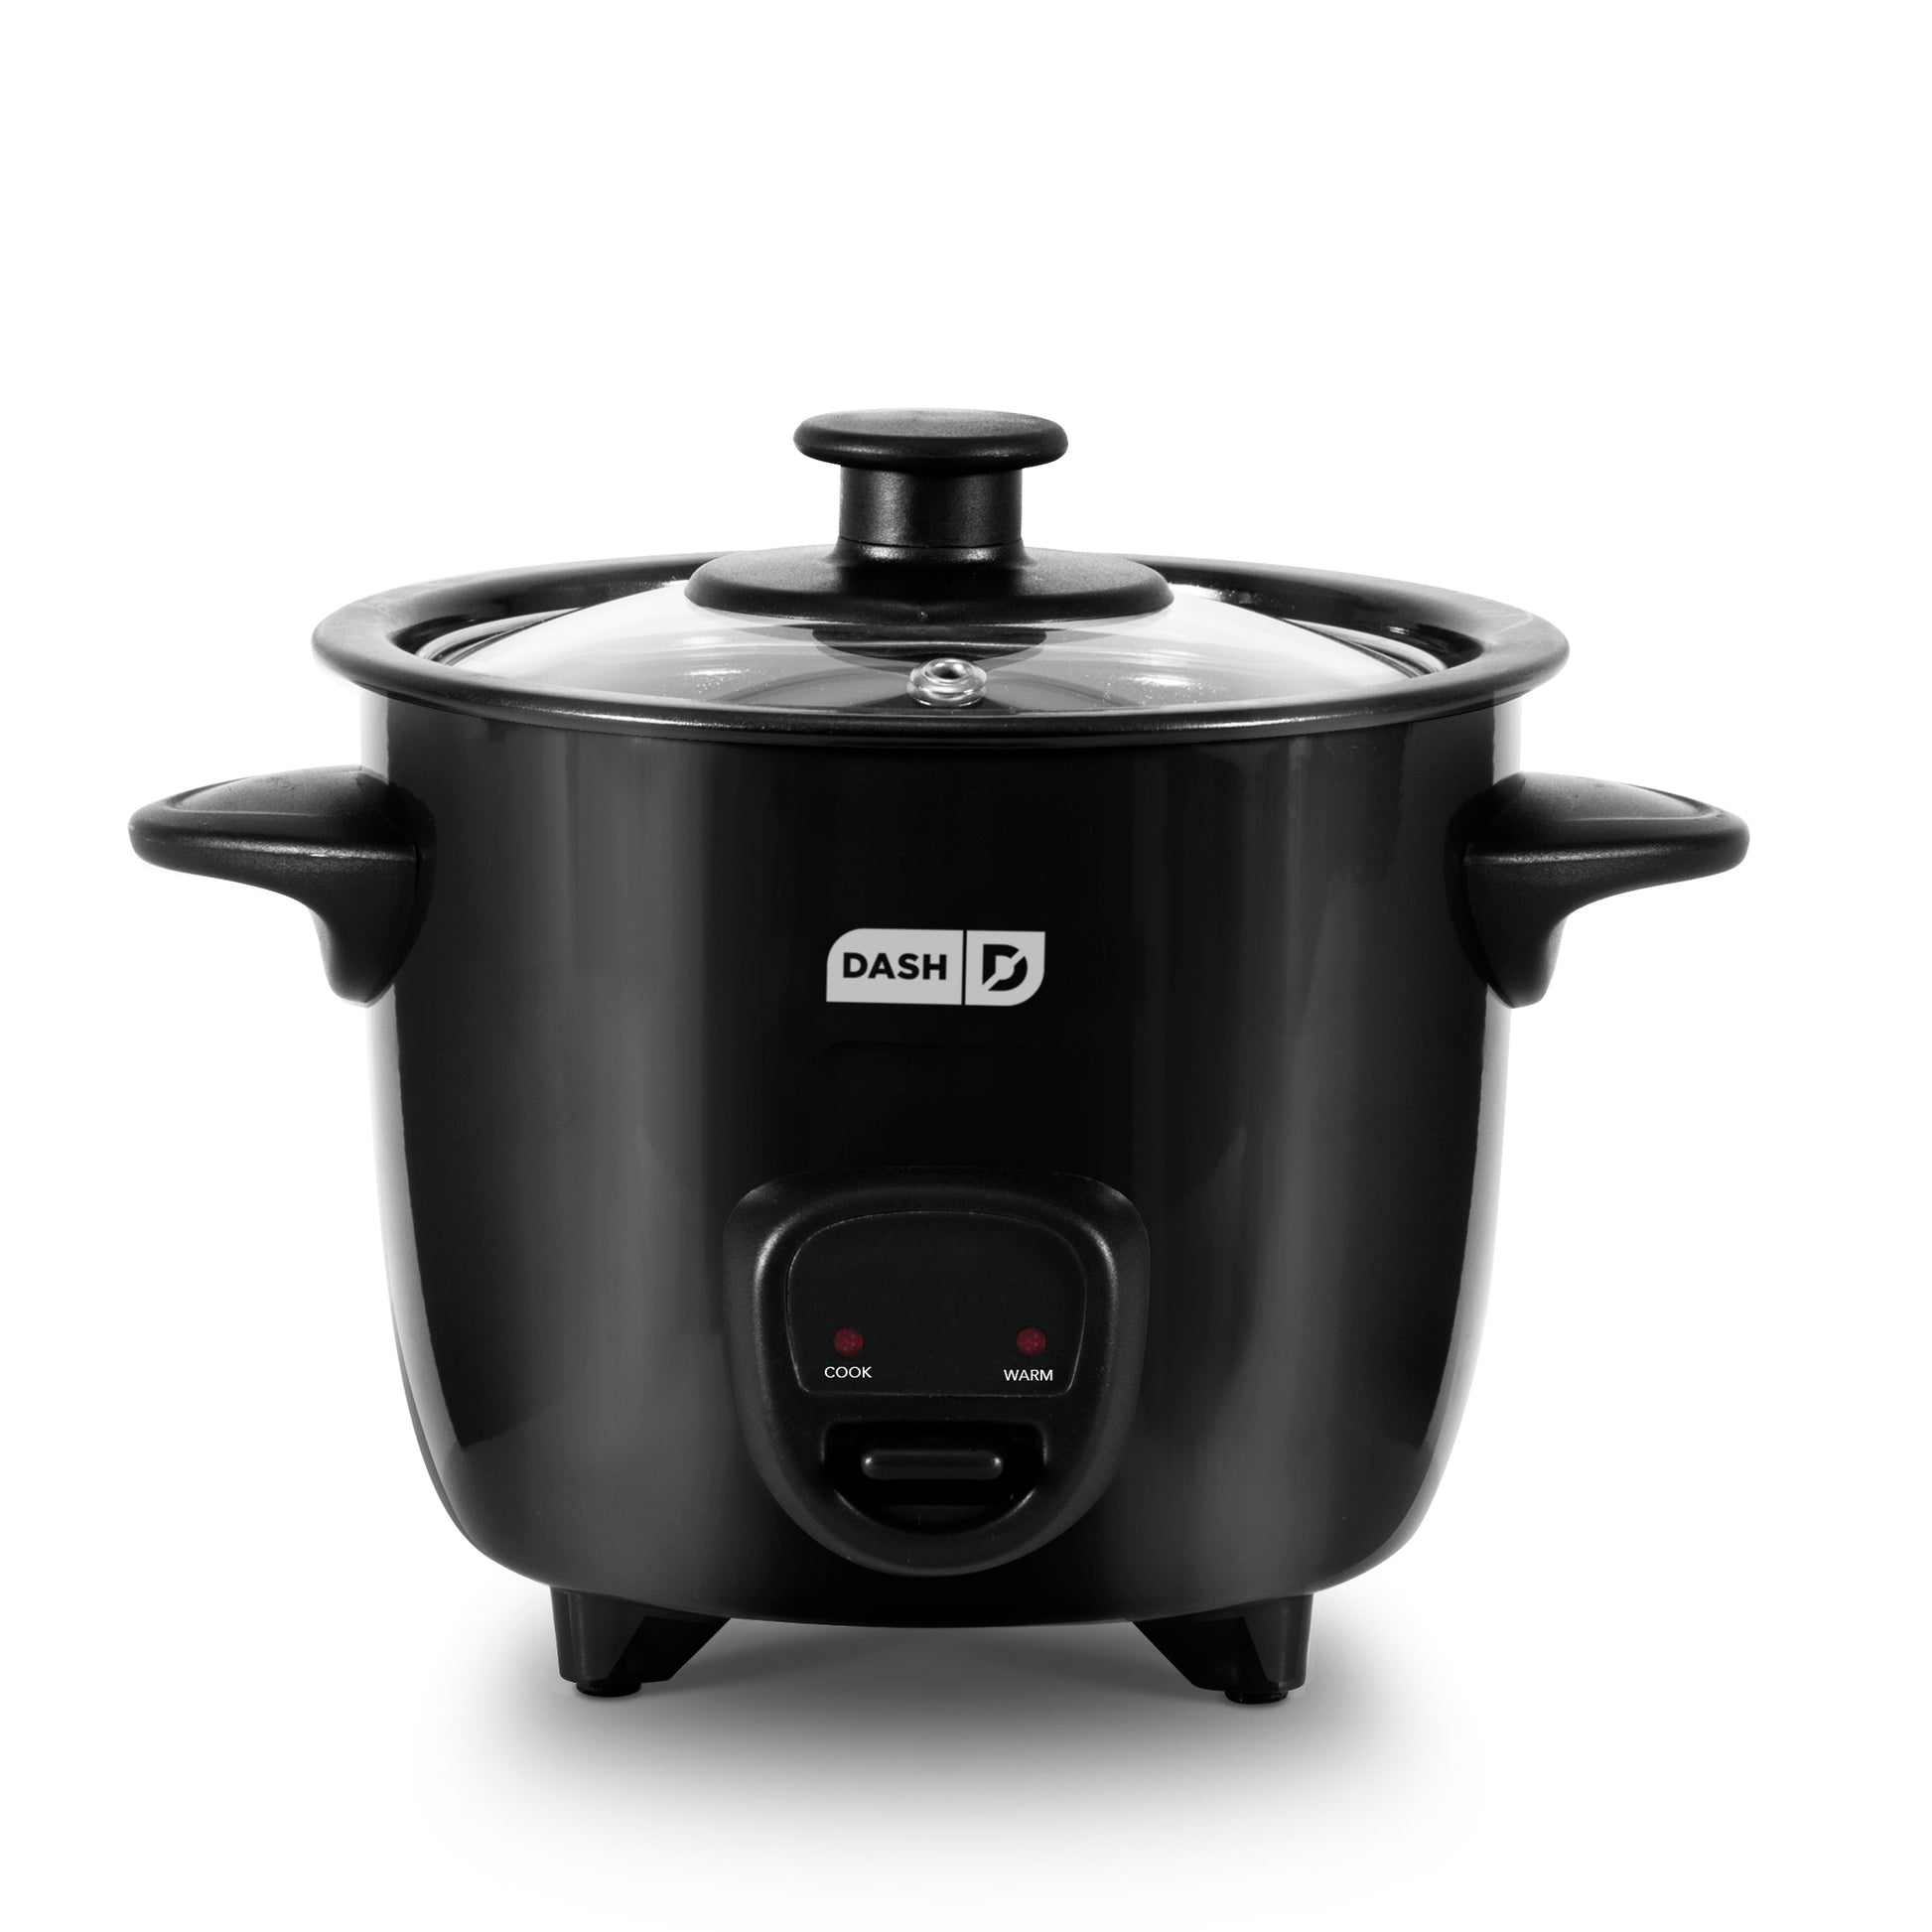 Dash Mini Rice Cooker Review, Mom's Surprise New Rice Cooker